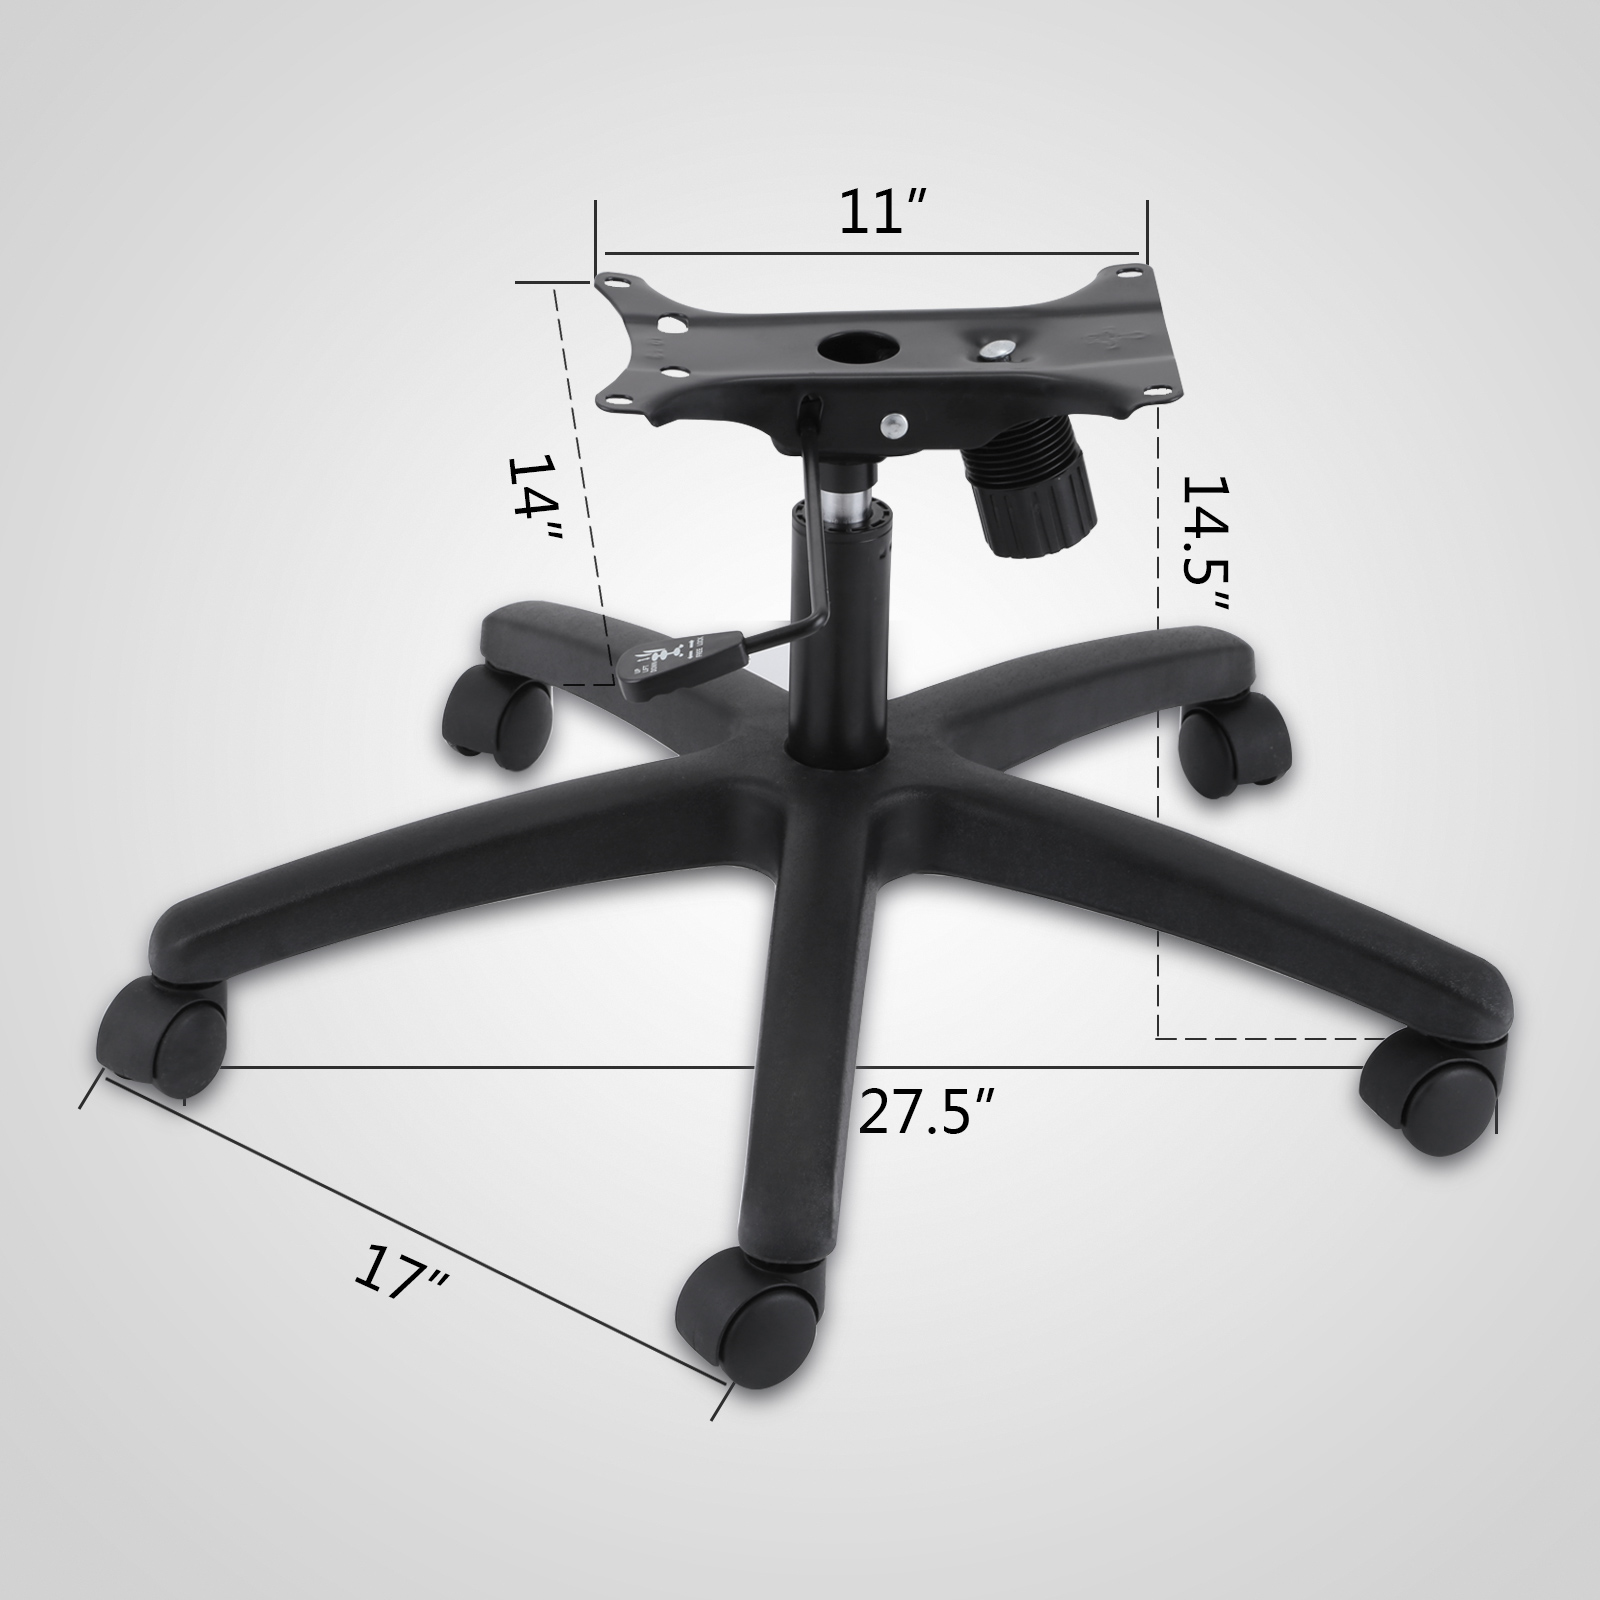 Office Chair Base Kit / CPSC, Gruga U.S.A. Announce Recall to Repair